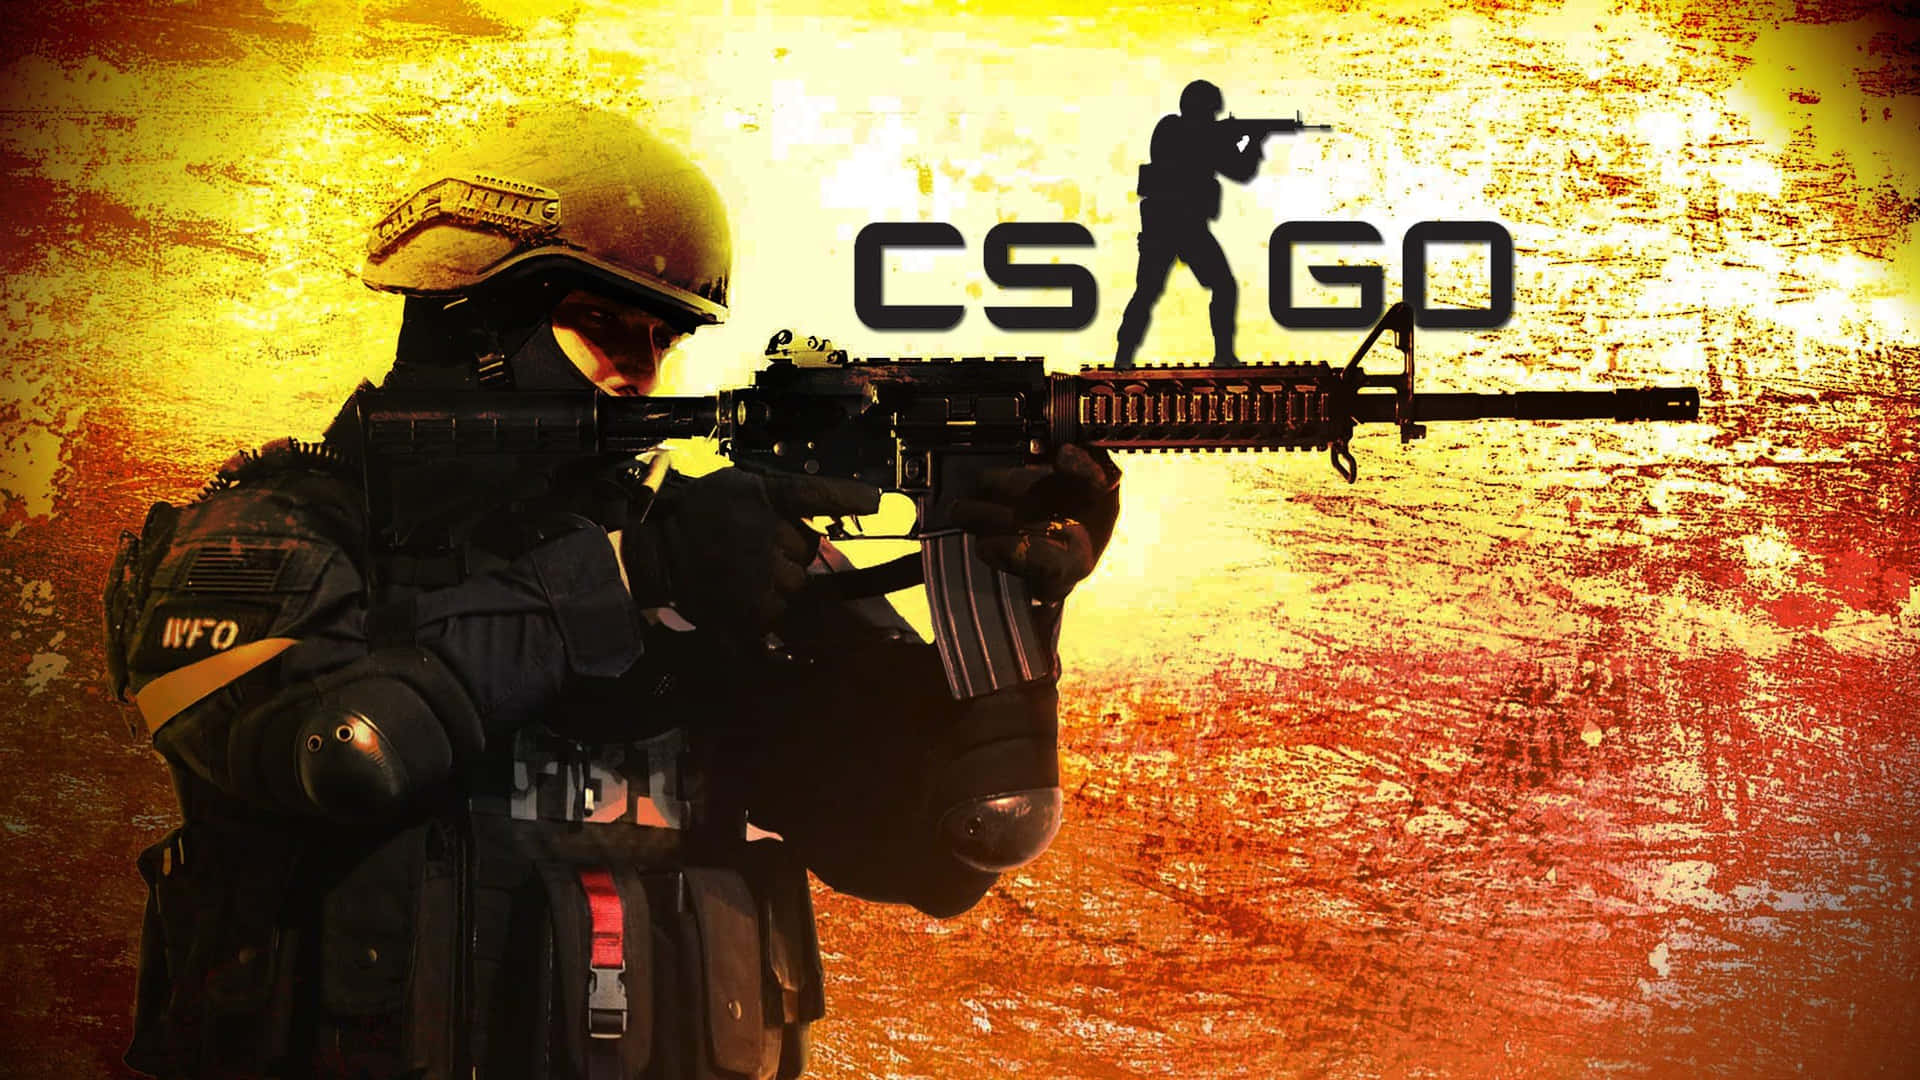 CS:GO Background - Play like a Pro Wallpaper